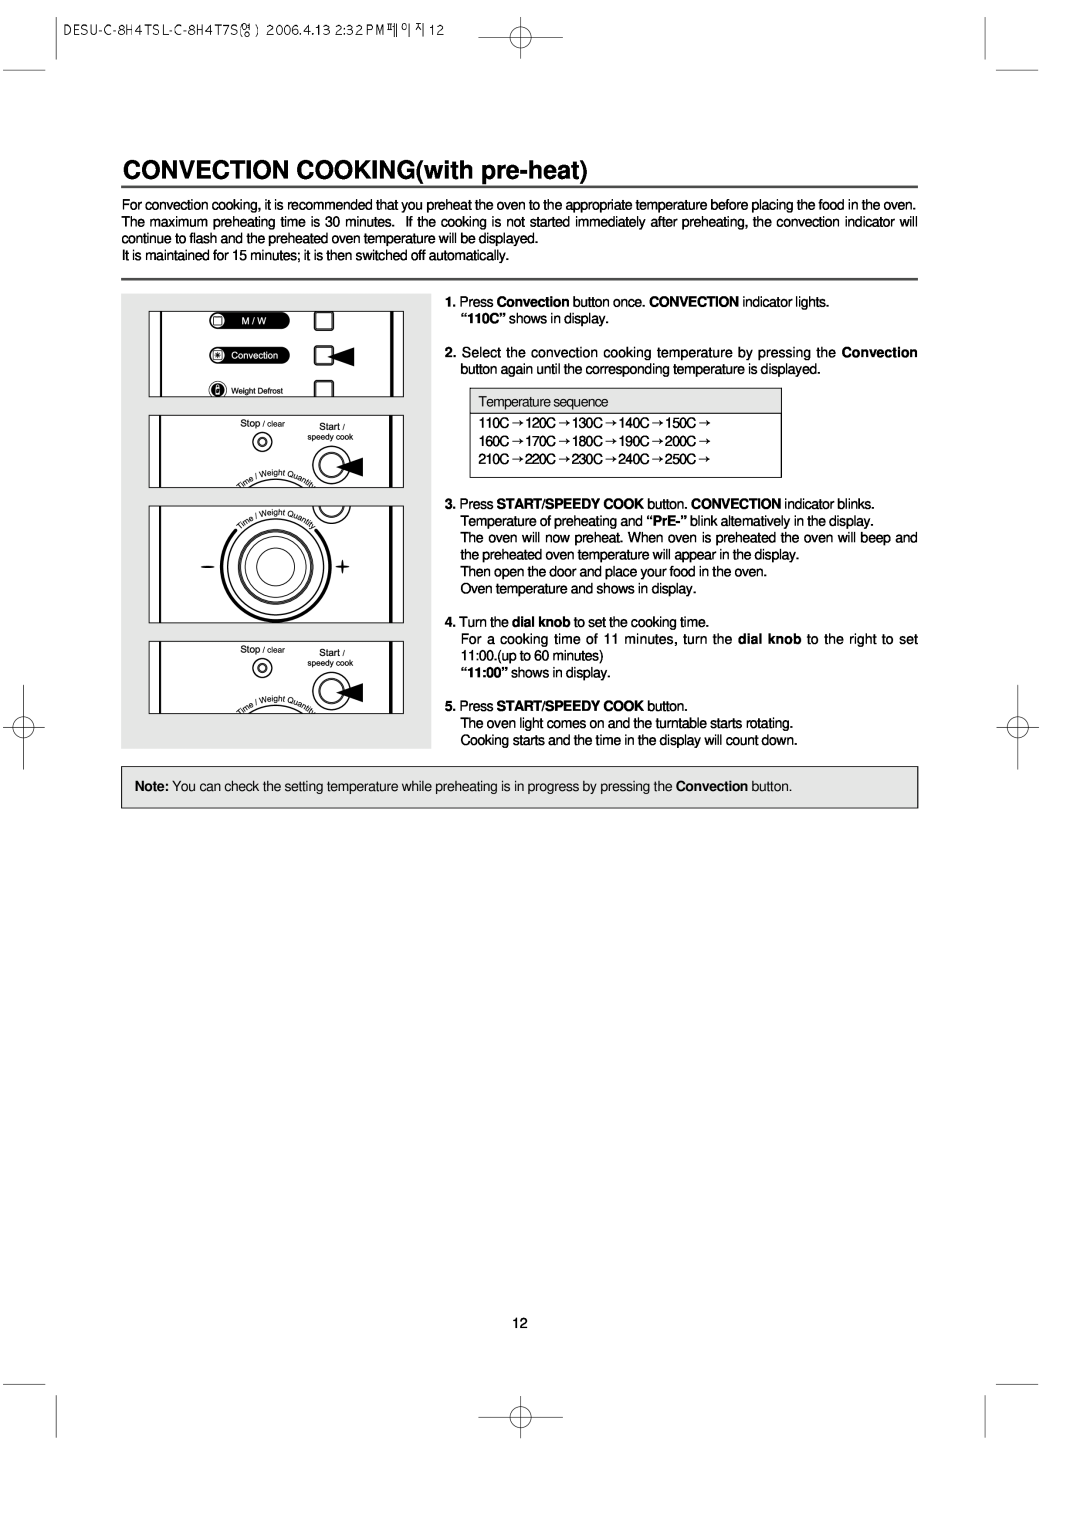 Daewoo KOC-8H4TSL owner manual CONVECTION COOKINGwith pre-heat, Press START/SPEEDY COOK button 